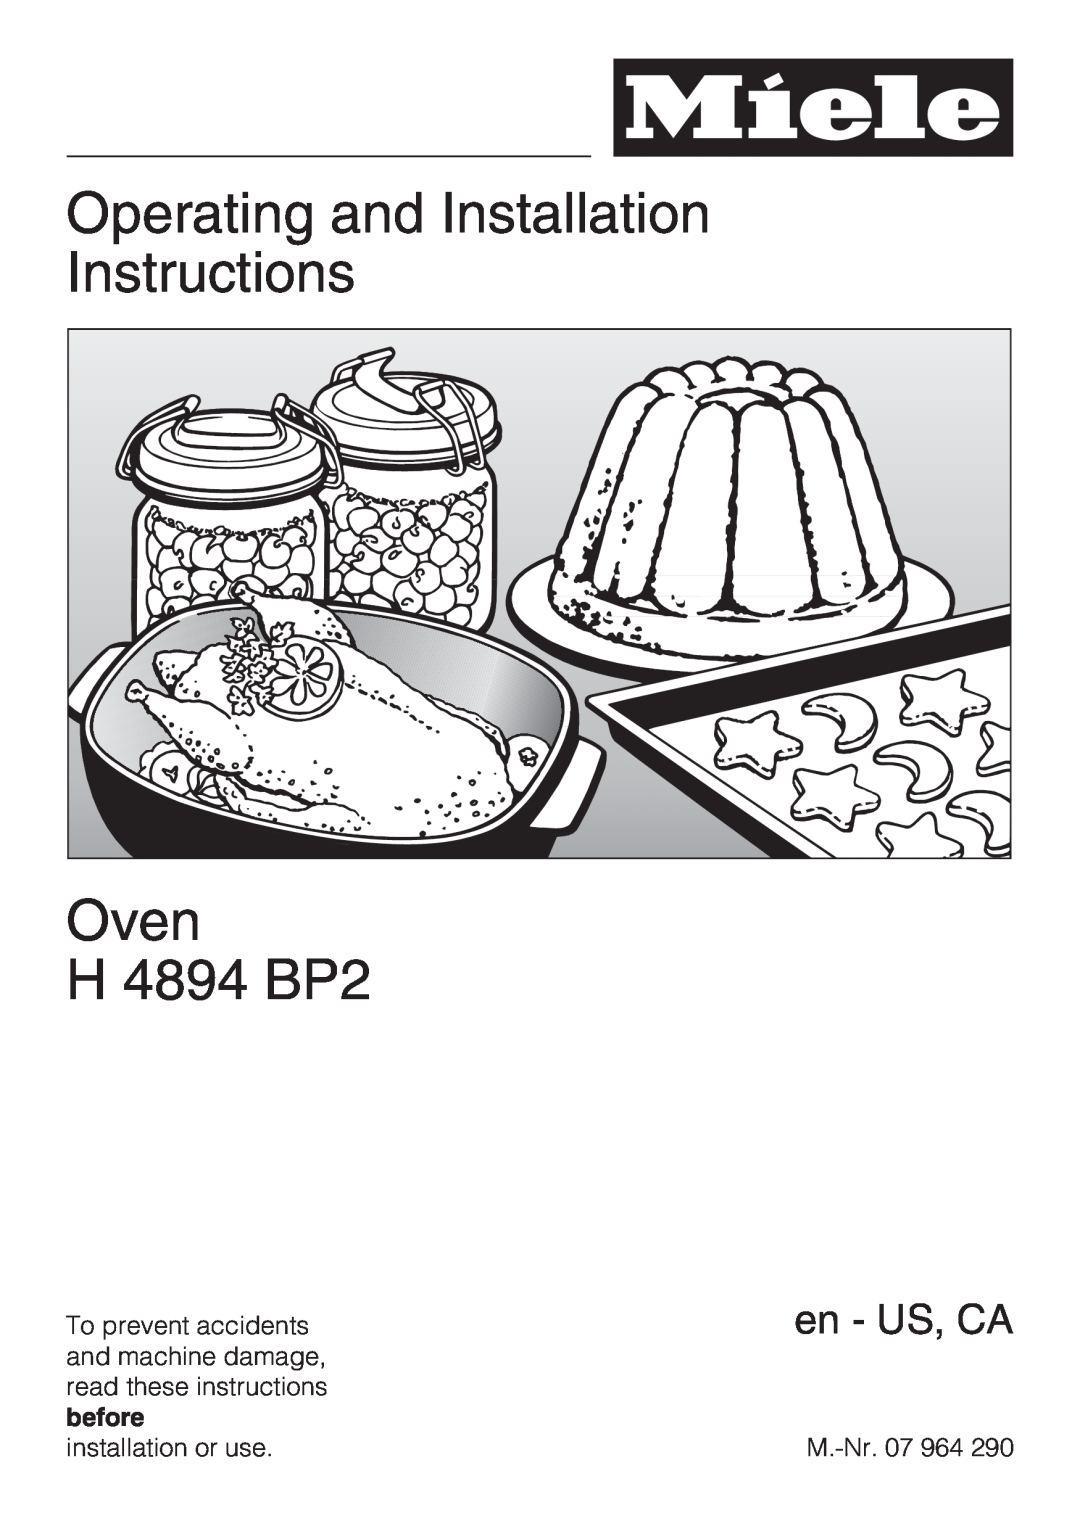 Miele H 4894 BP2 installation instructions Operating and Installation Instructions, Oven, en - US, CA 